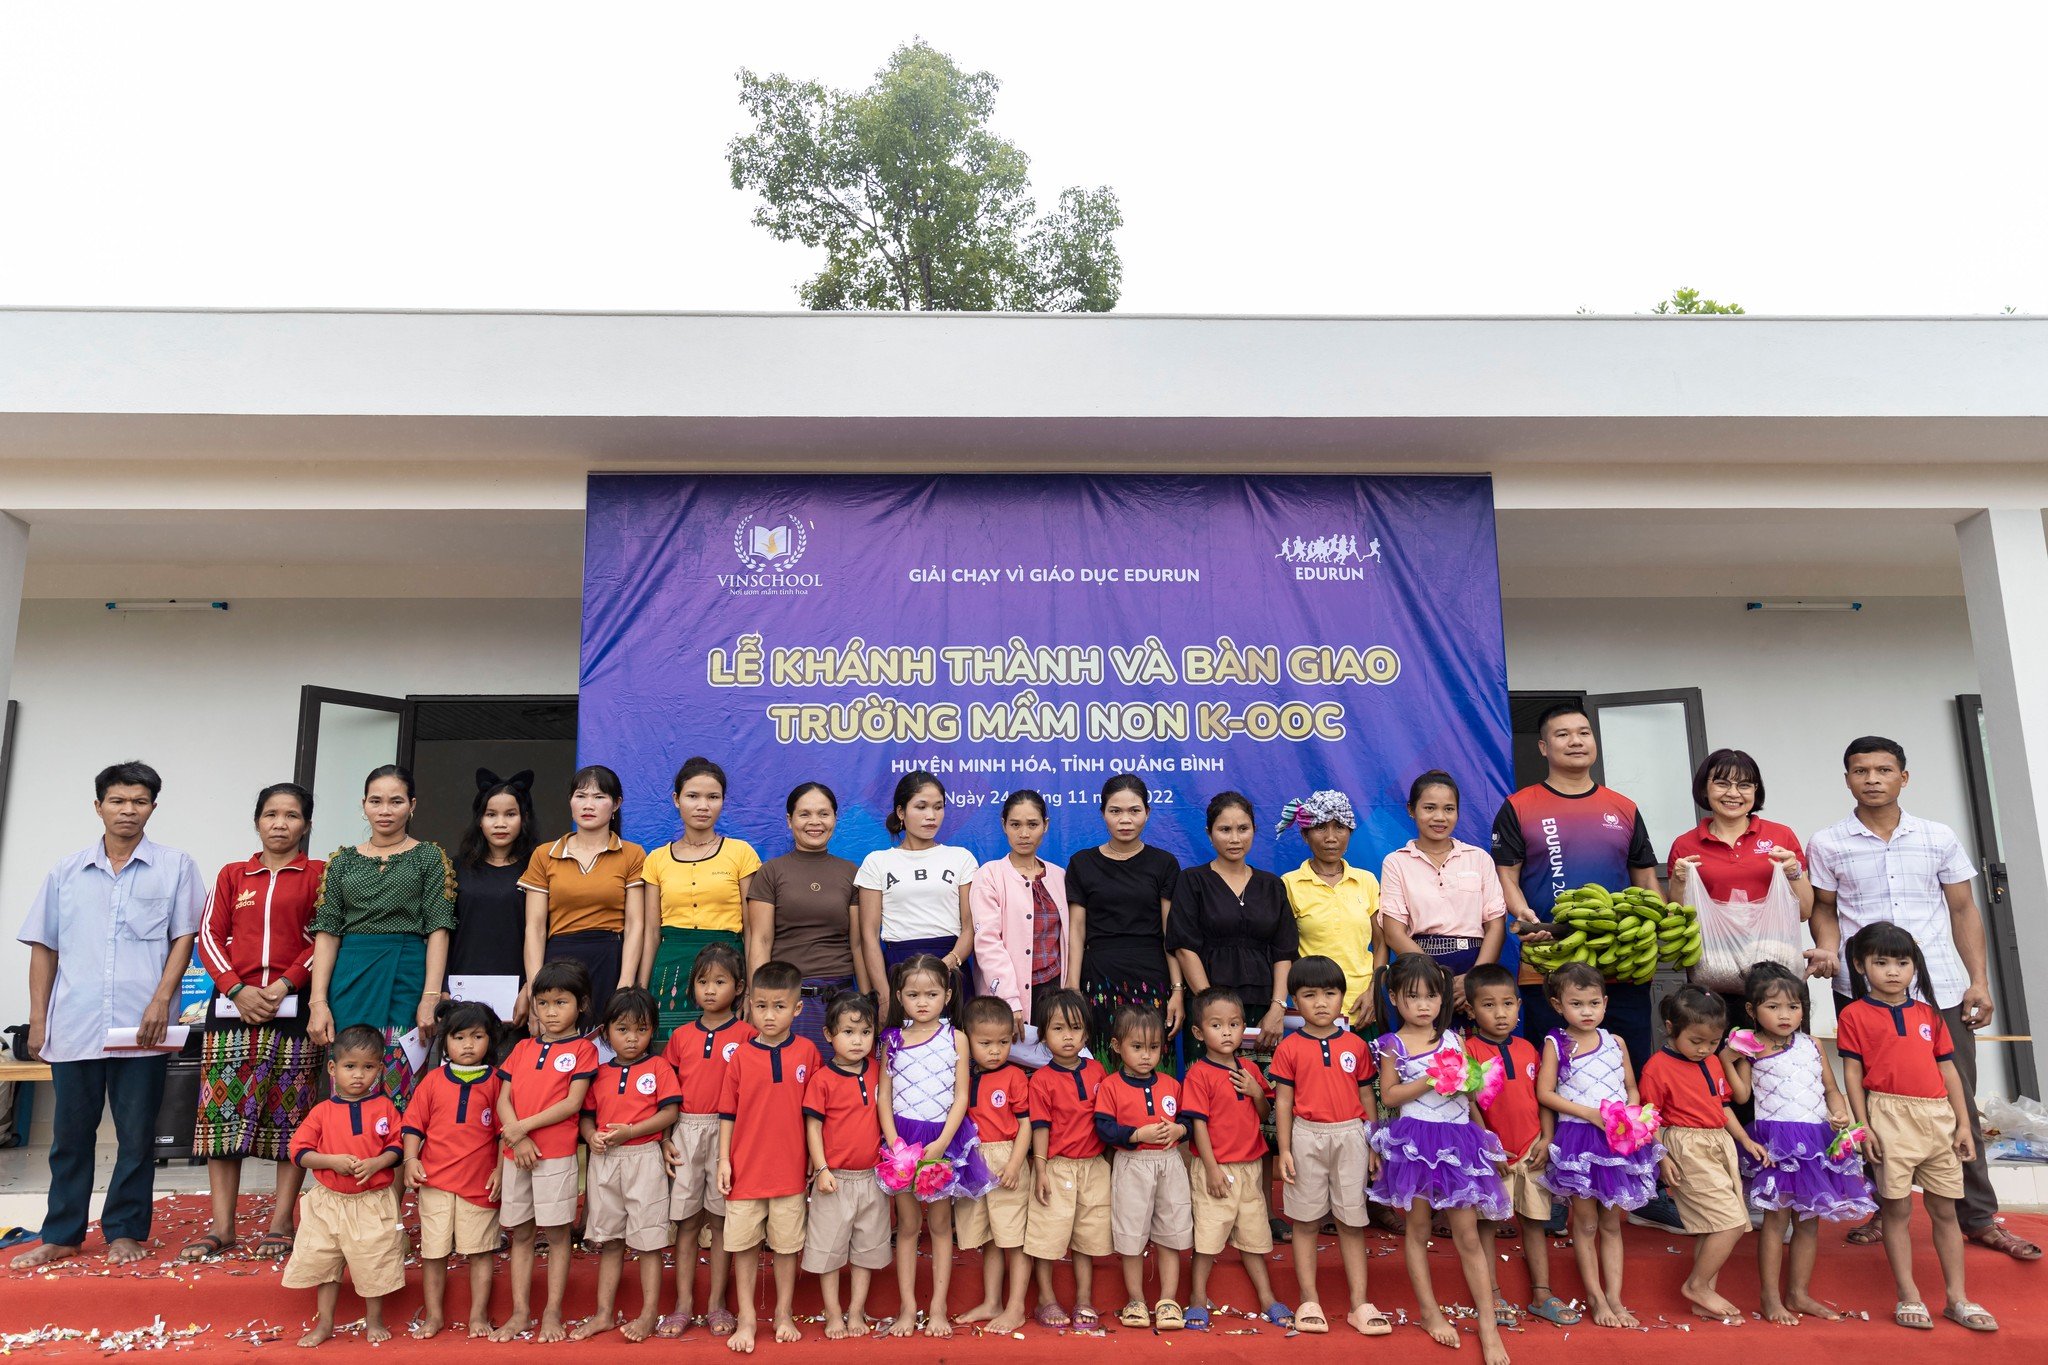 EDURUN’s journey of spreading love and care in Quang Binh